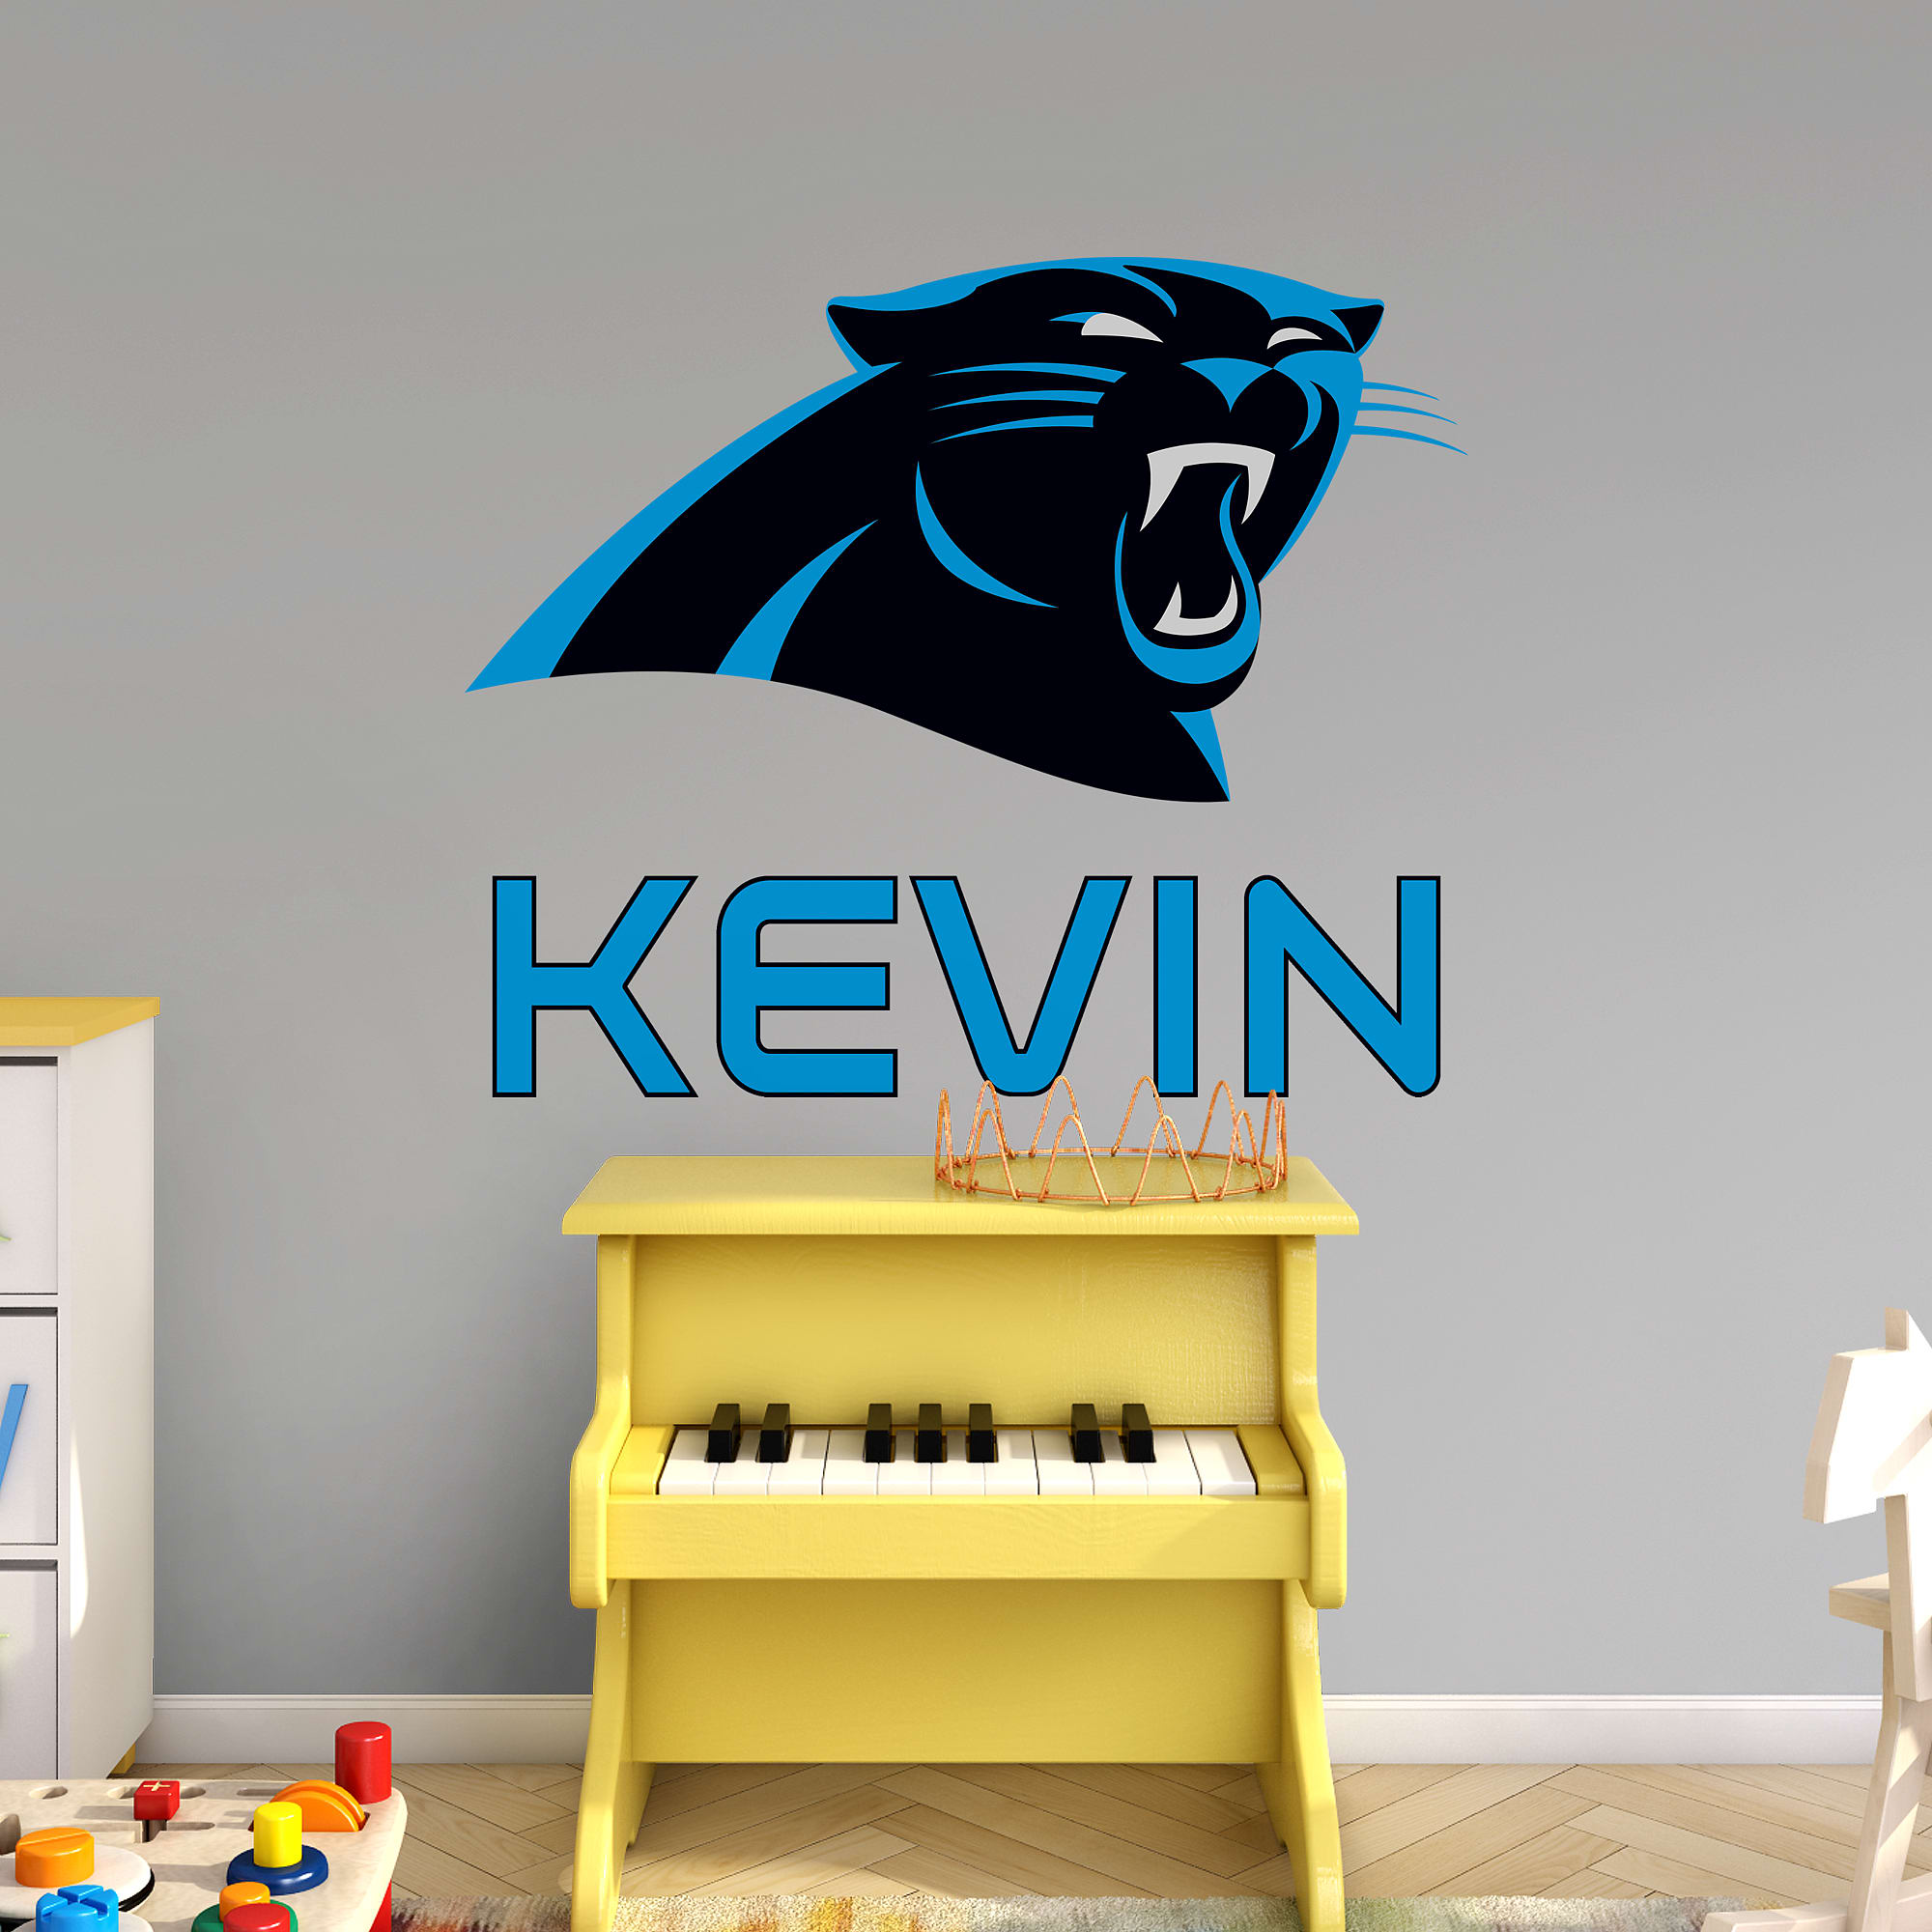 Carolina Panthers: Stacked Personalized Name - Officially Licensed NFL Transfer Decal in Blue (52"W x 39.5"H) by Fathead | Vinyl